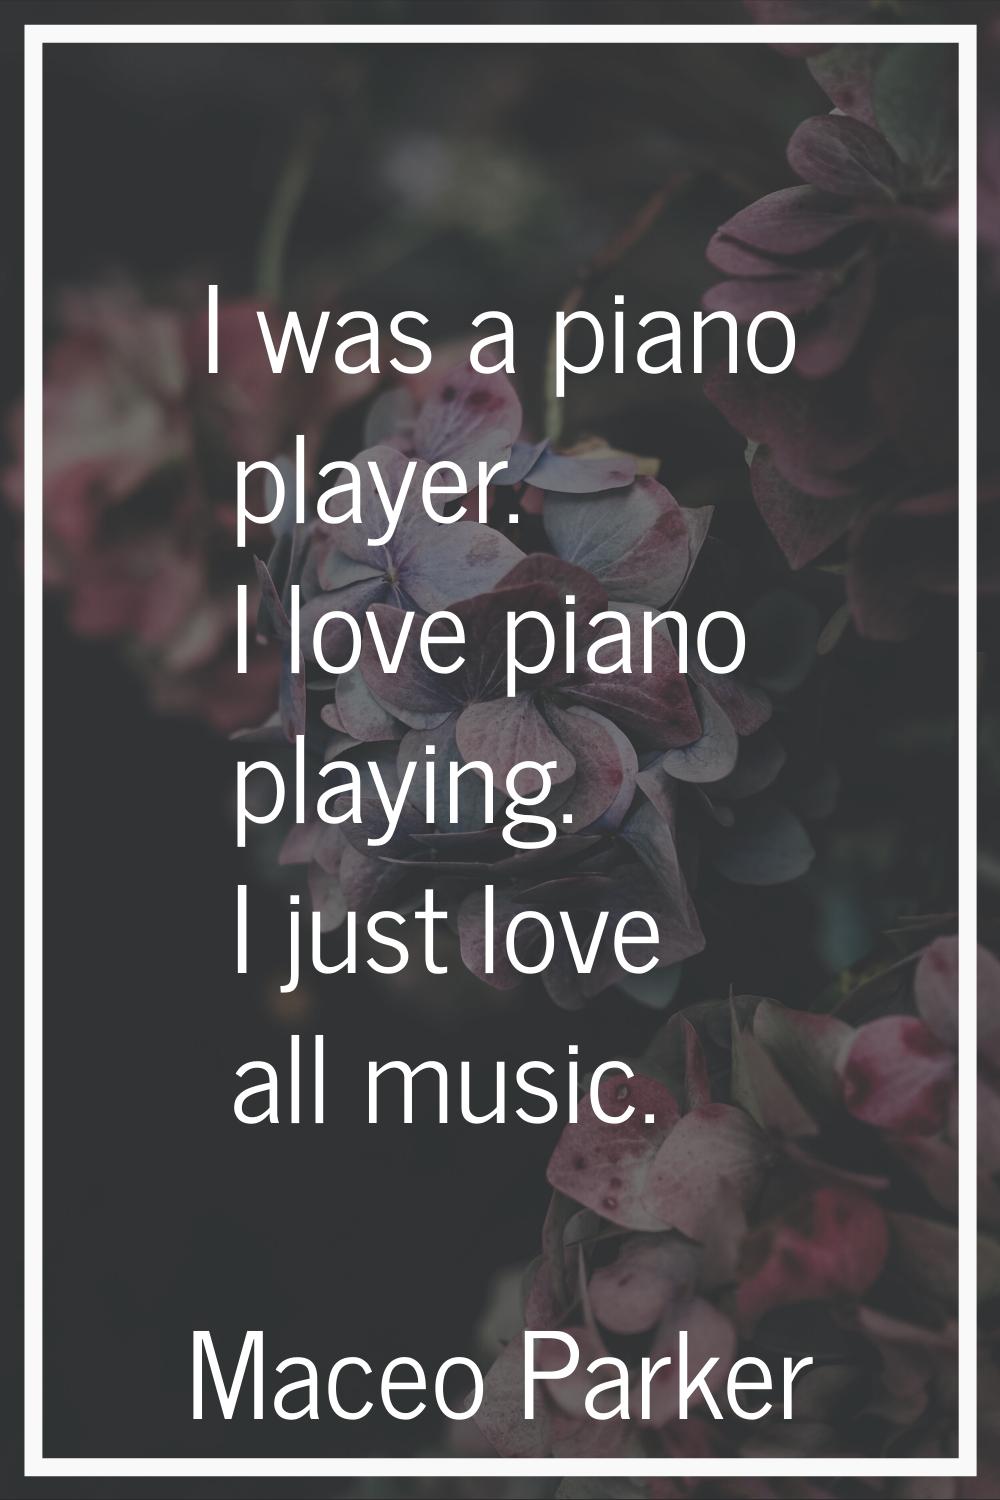 I was a piano player. I love piano playing. I just love all music.